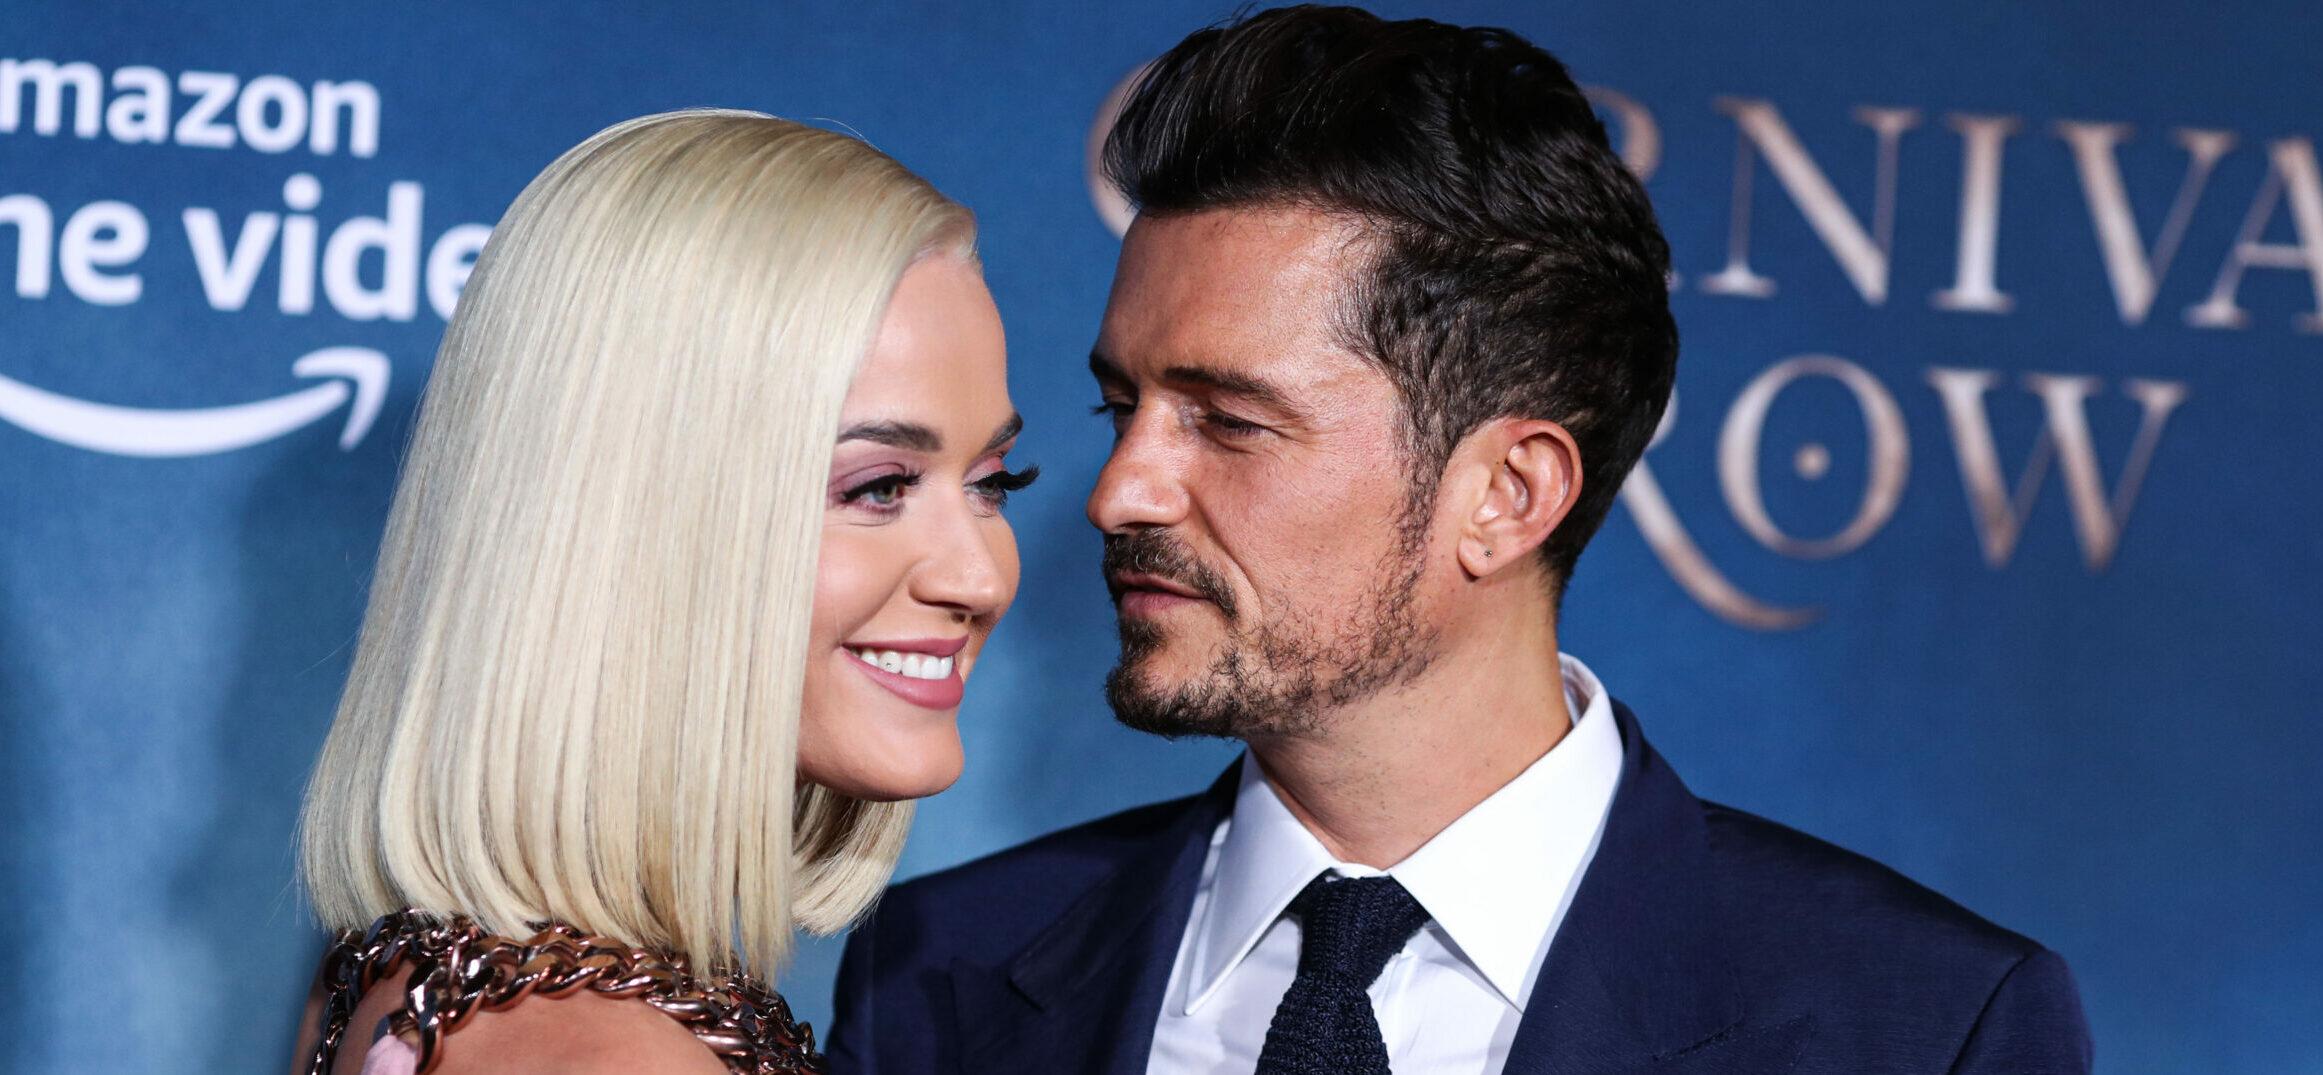 Orlando Bloom Dotes On Fiancée Katy Perry After Calling Romance ‘Challenging’: ‘My Heart’